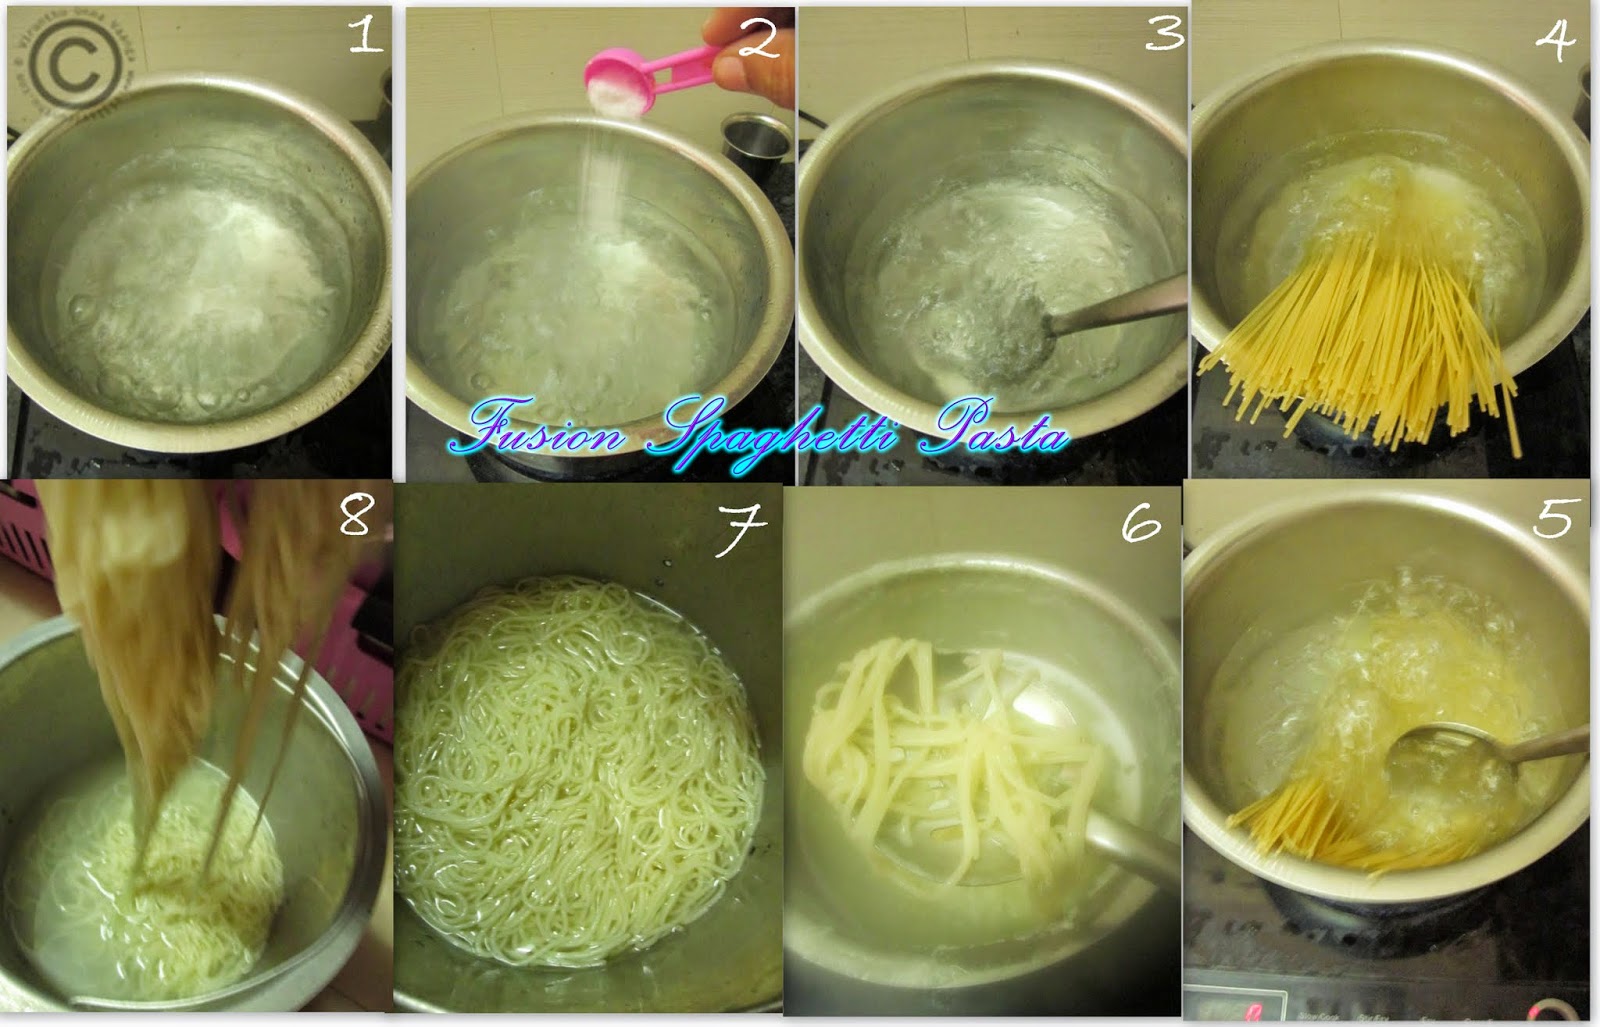 how-to-cook-pasta